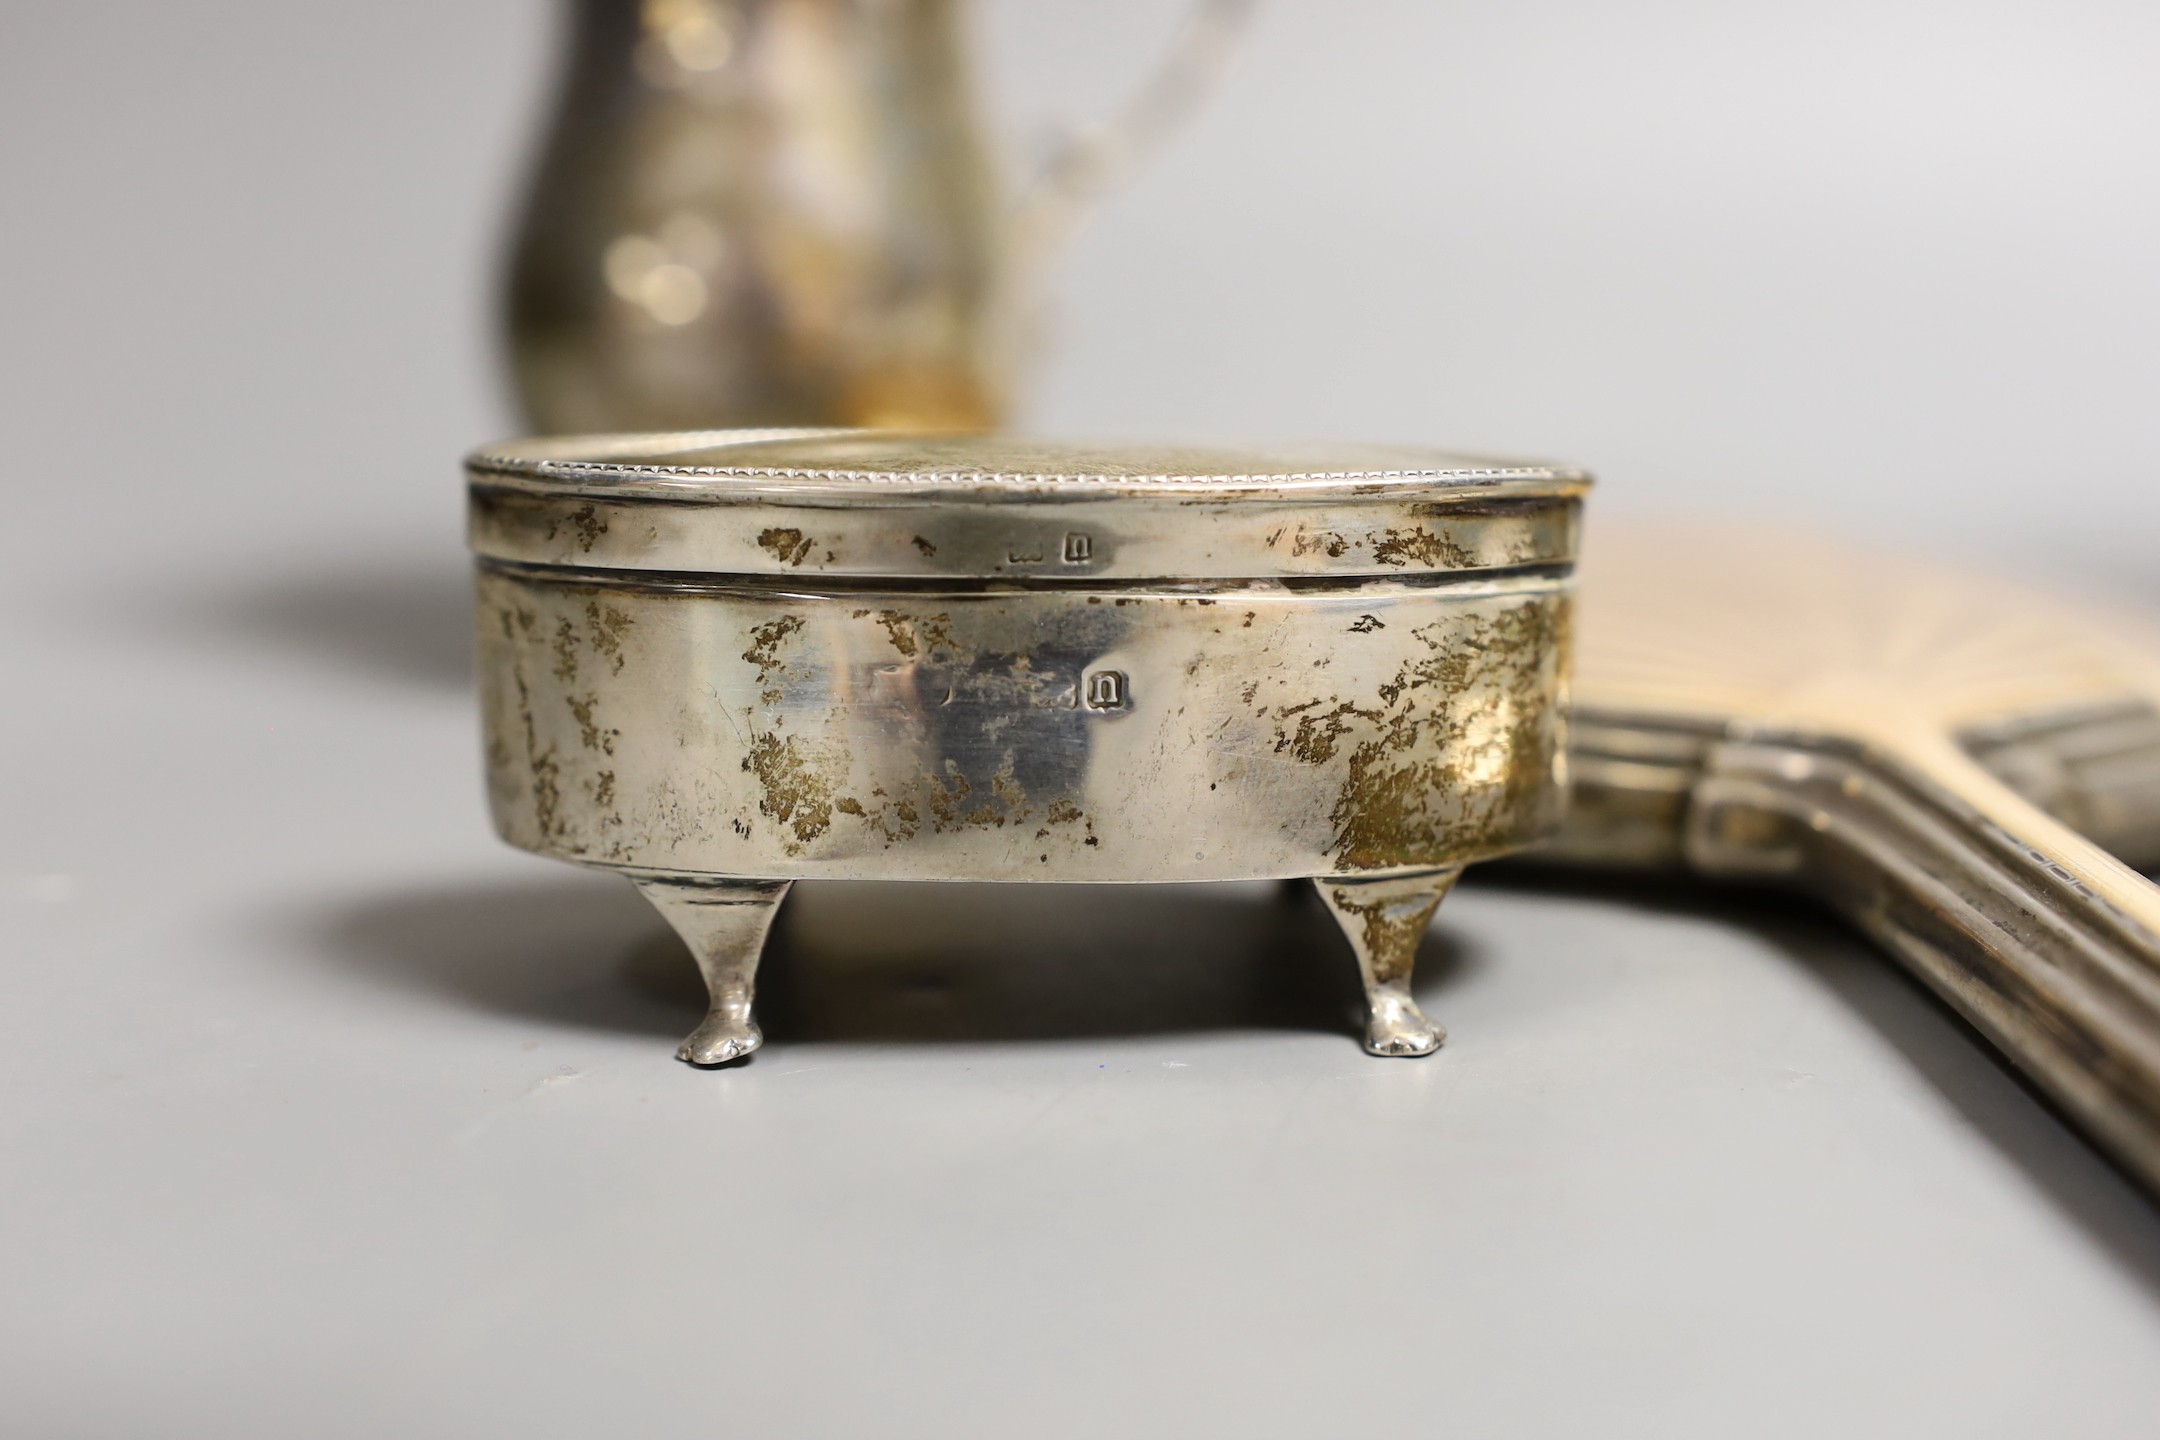 A George V silver two handled pedestal cup, Charles Edwards, London, 1923, height 13.2cm, an Art Deco silver and enamelled hand mirror, Birmingham, 1933, a silver oval trinket box, a silver cream jug and a pair of silver